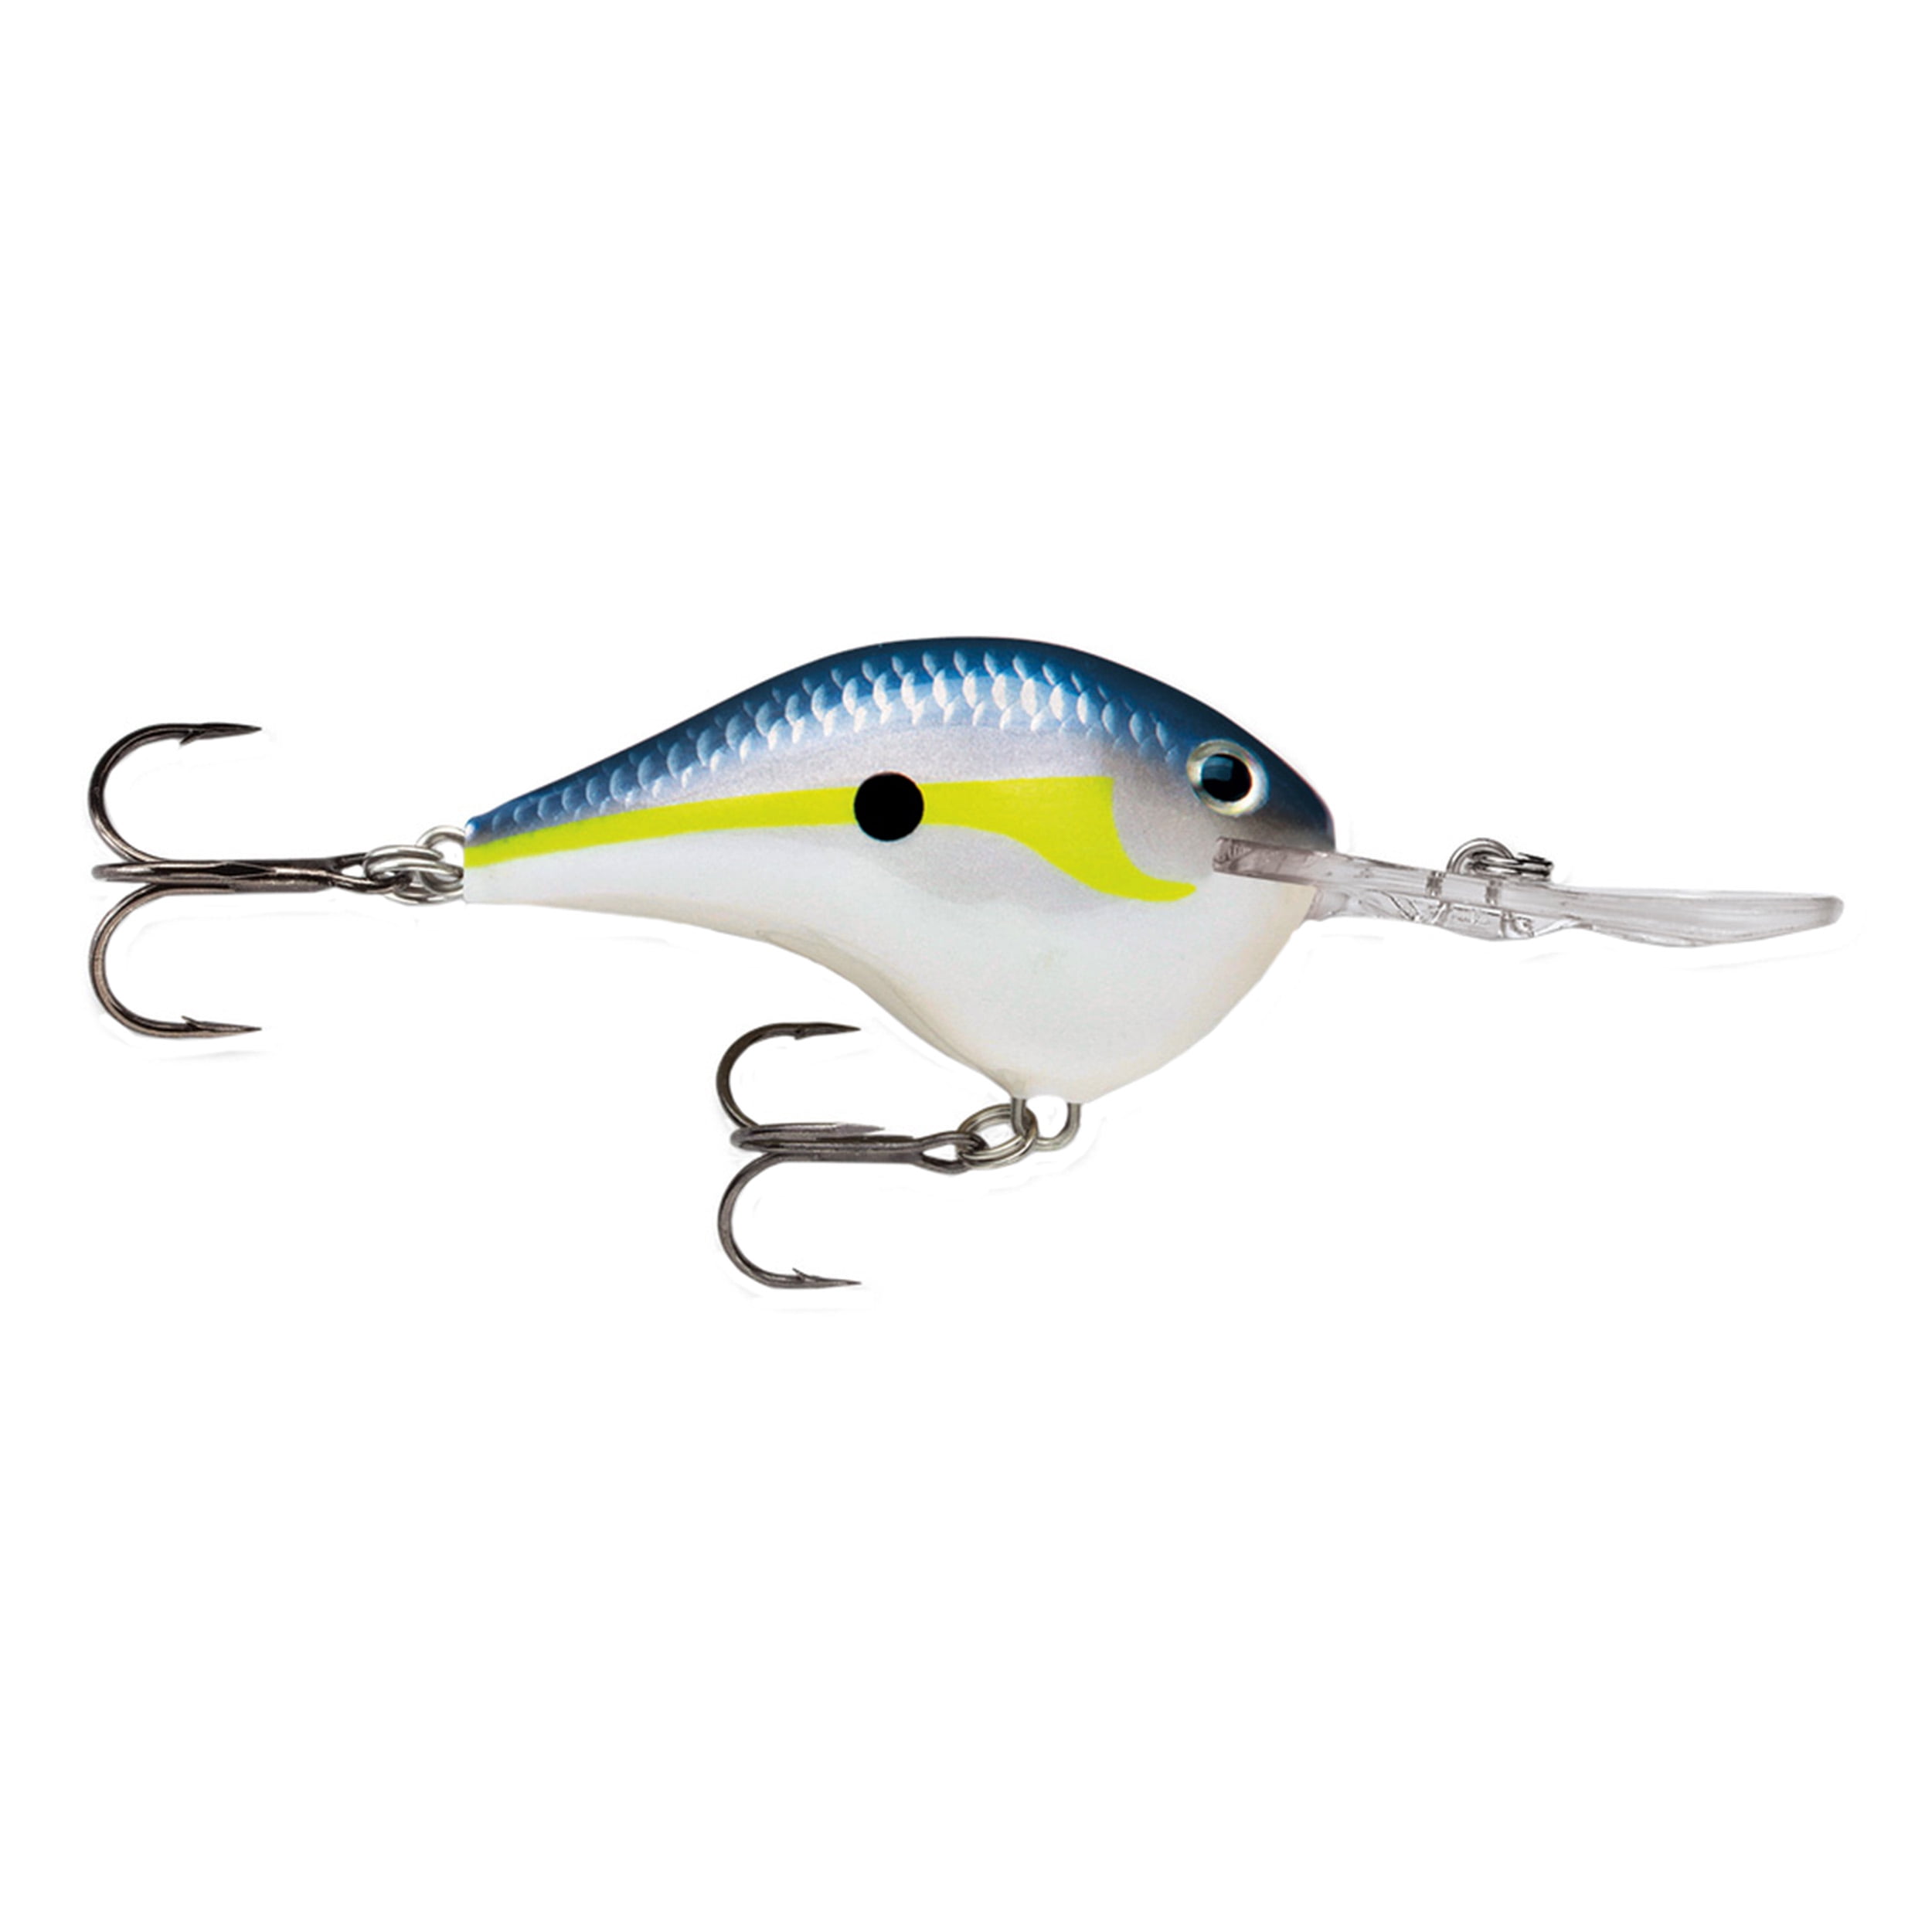 Rapala Dives To DT-6 Rattlin' Fishing Lure Demon 